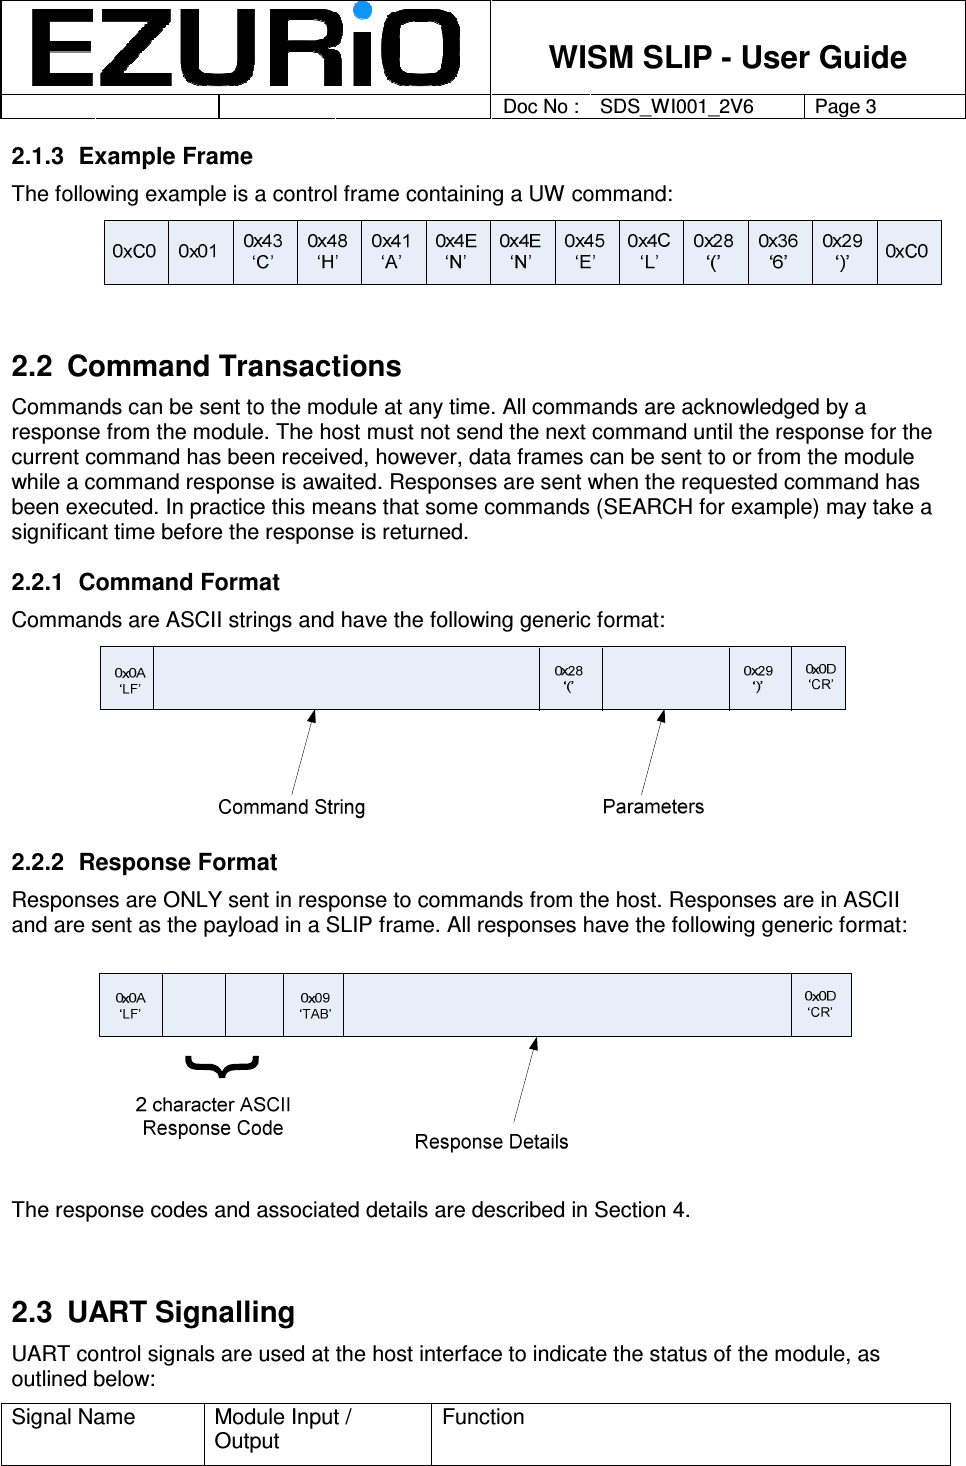    WISM SLIP - User Guide         Doc No : SDS_WI001_2V6 Page 3     2.1.3  Example Frame The following example is a control frame containing a UW command:  2.2  Command Transactions Commands can be sent to the module at any time. All commands are acknowledged by a response from the module. The host must not send the next command until the response for the current command has been received, however, data frames can be sent to or from the module while a command response is awaited. Responses are sent when the requested command has been executed. In practice this means that some commands (SEARCH for example) may take a significant time before the response is returned.     2.2.1  Command Format Commands are ASCII strings and have the following generic format:  2.2.2  Response Format Responses are ONLY sent in response to commands from the host. Responses are in ASCII and are sent as the payload in a SLIP frame. All responses have the following generic format:  The response codes and associated details are described in Section 4.  2.3  UART Signalling  UART control signals are used at the host interface to indicate the status of the module, as outlined below: Signal Name  Module Input / Output Function 